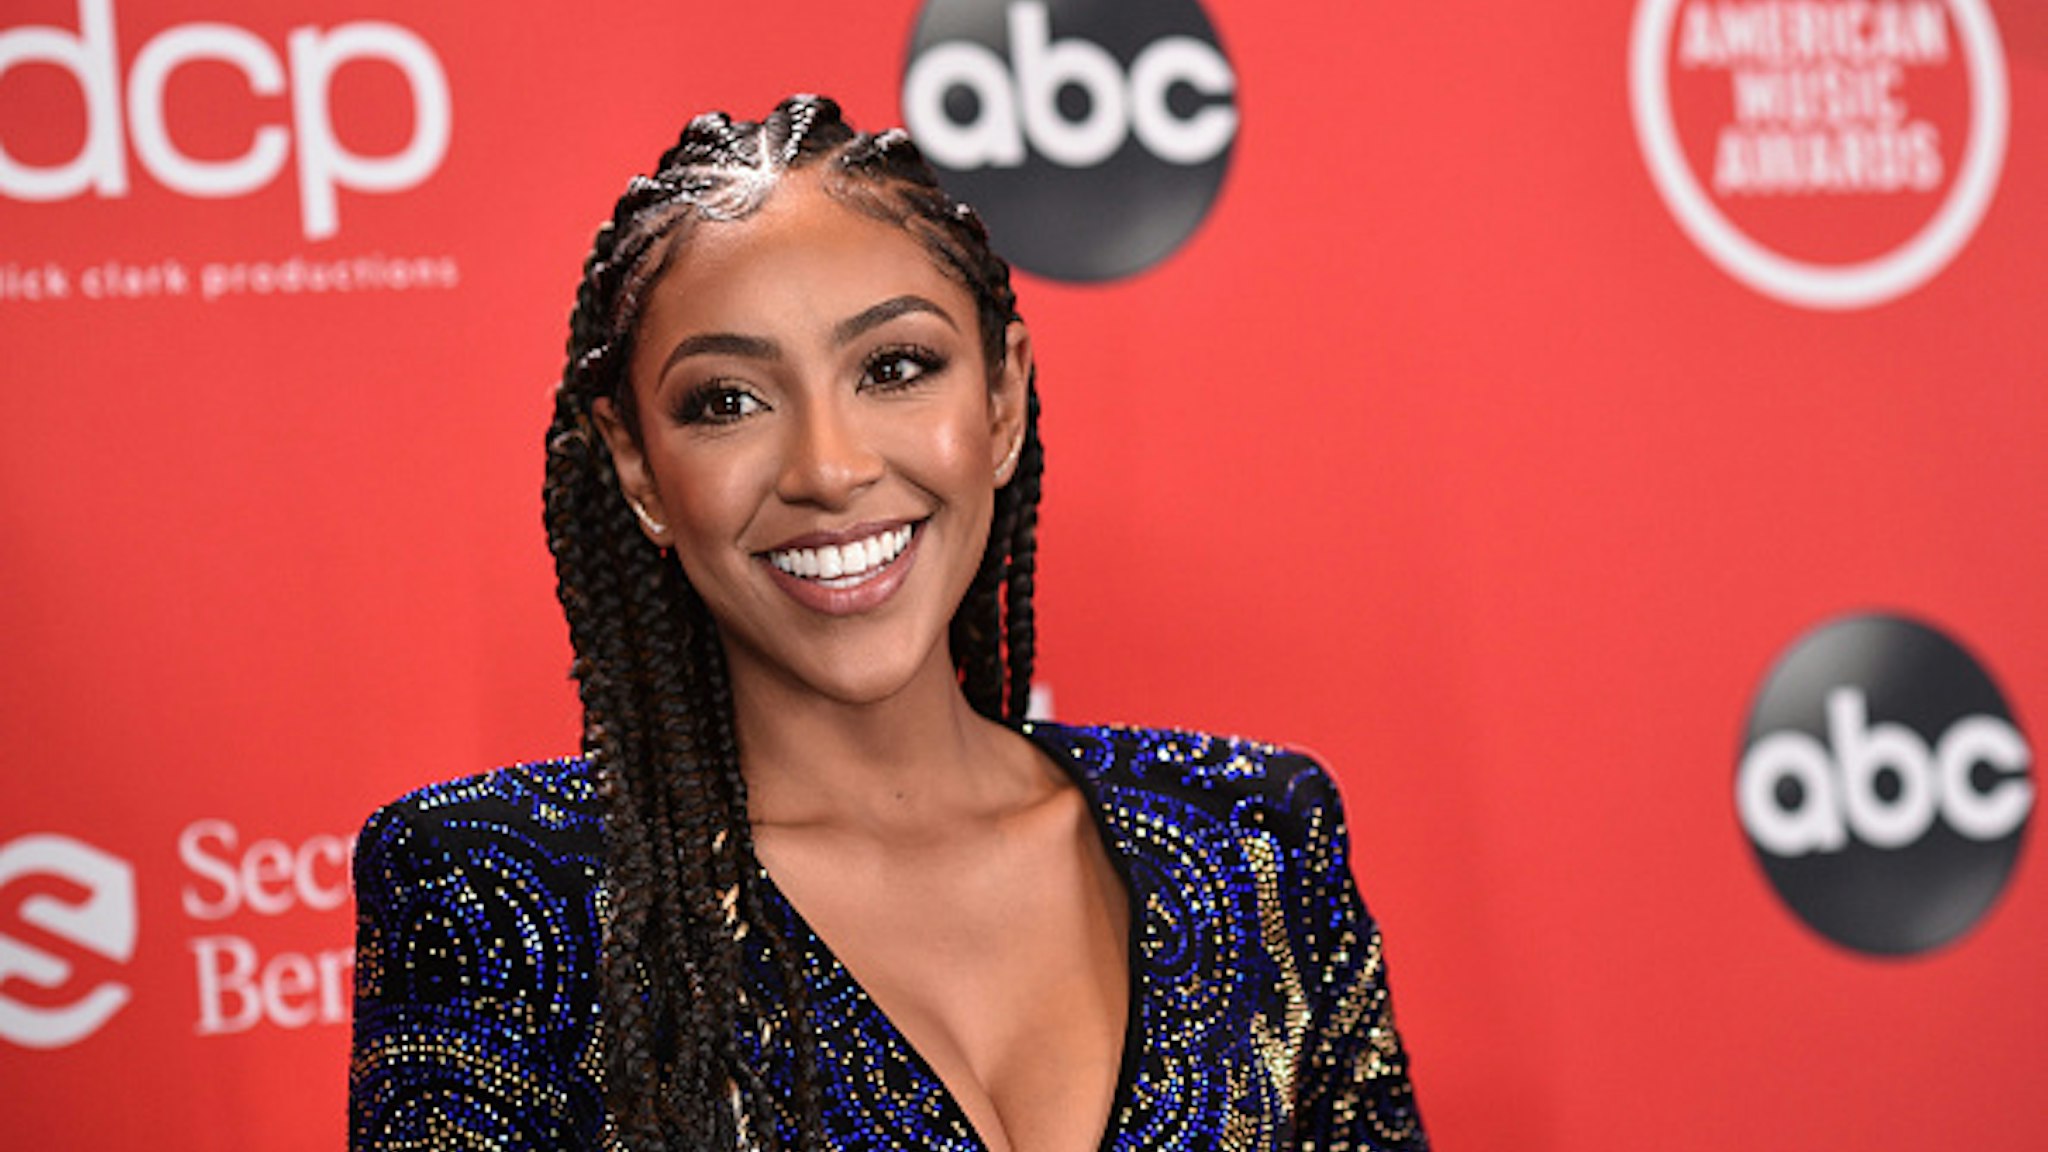 THE 2020 AMERICAN MUSIC AWARDS - "The 2020 American Music Awards", hosted by Taraji P. Henson aired from the Microsoft Theater in Los Angeles, SUNDAY, NOV. 22 (8:00-11:00 p.m. EST), on ABC.